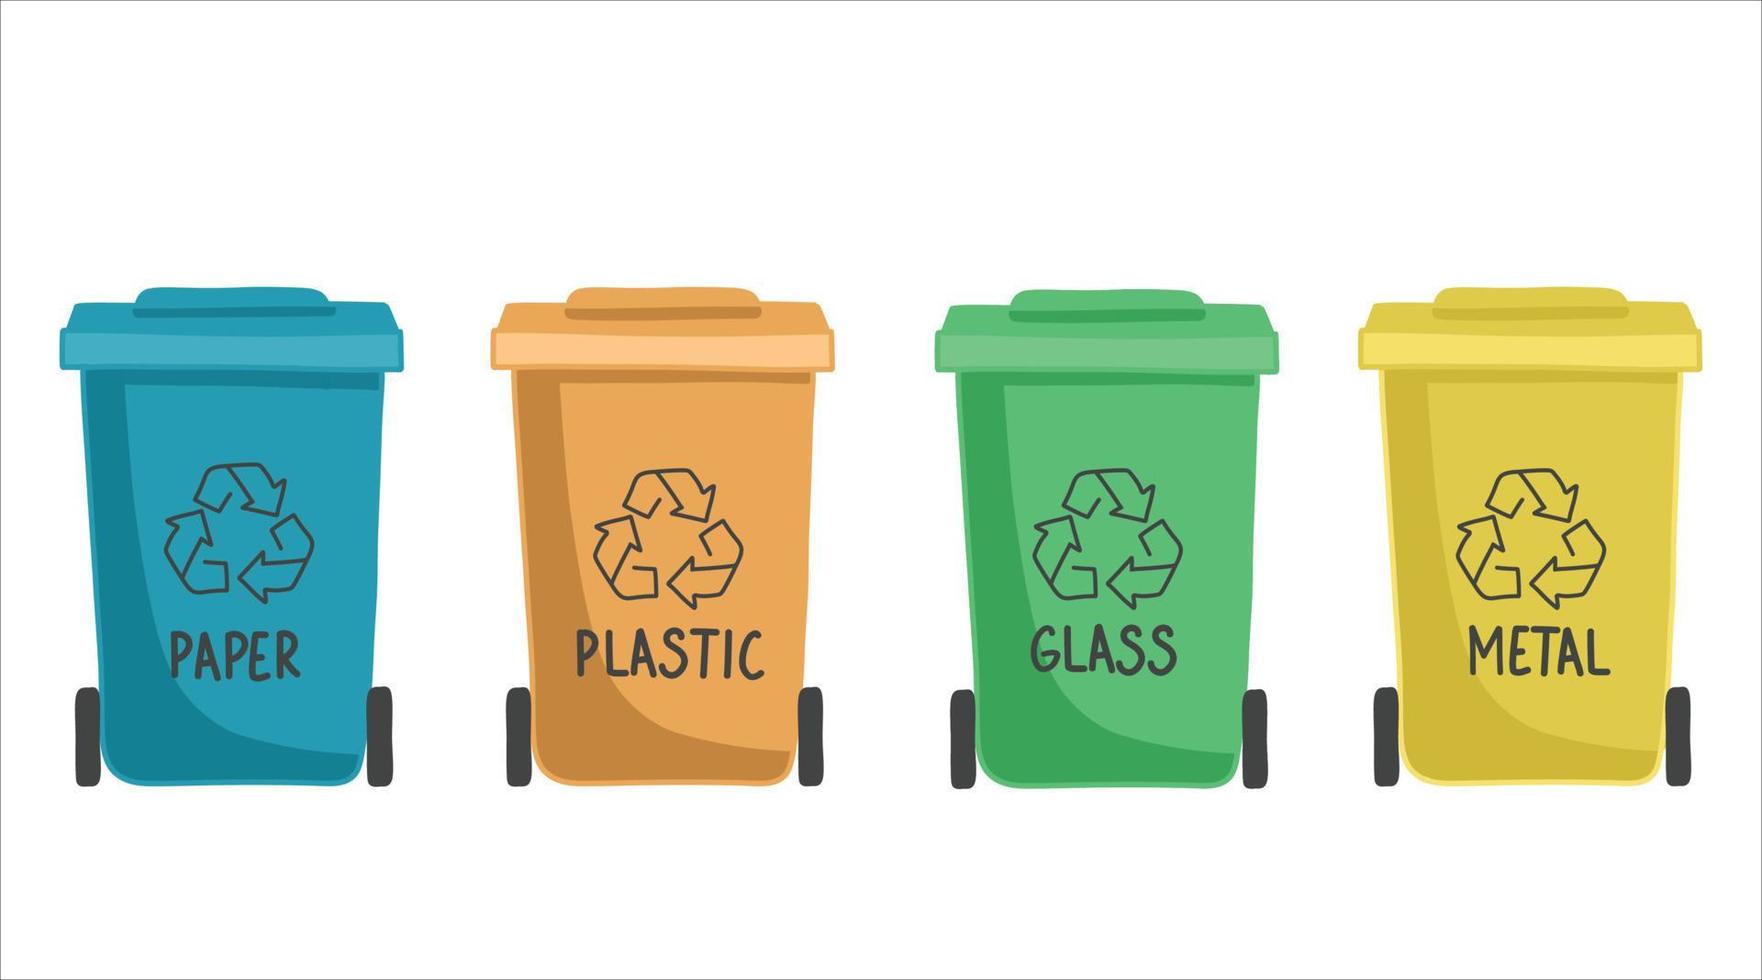 https://static.vecteezy.com/system/resources/previews/013/277/938/non_2x/containers-or-recycle-bins-for-paper-plastic-glass-and-metal-trash-concept-of-separate-garbage-collection-dumpsters-of-different-colors-isolated-on-white-background-flat-illustration-vector.jpg